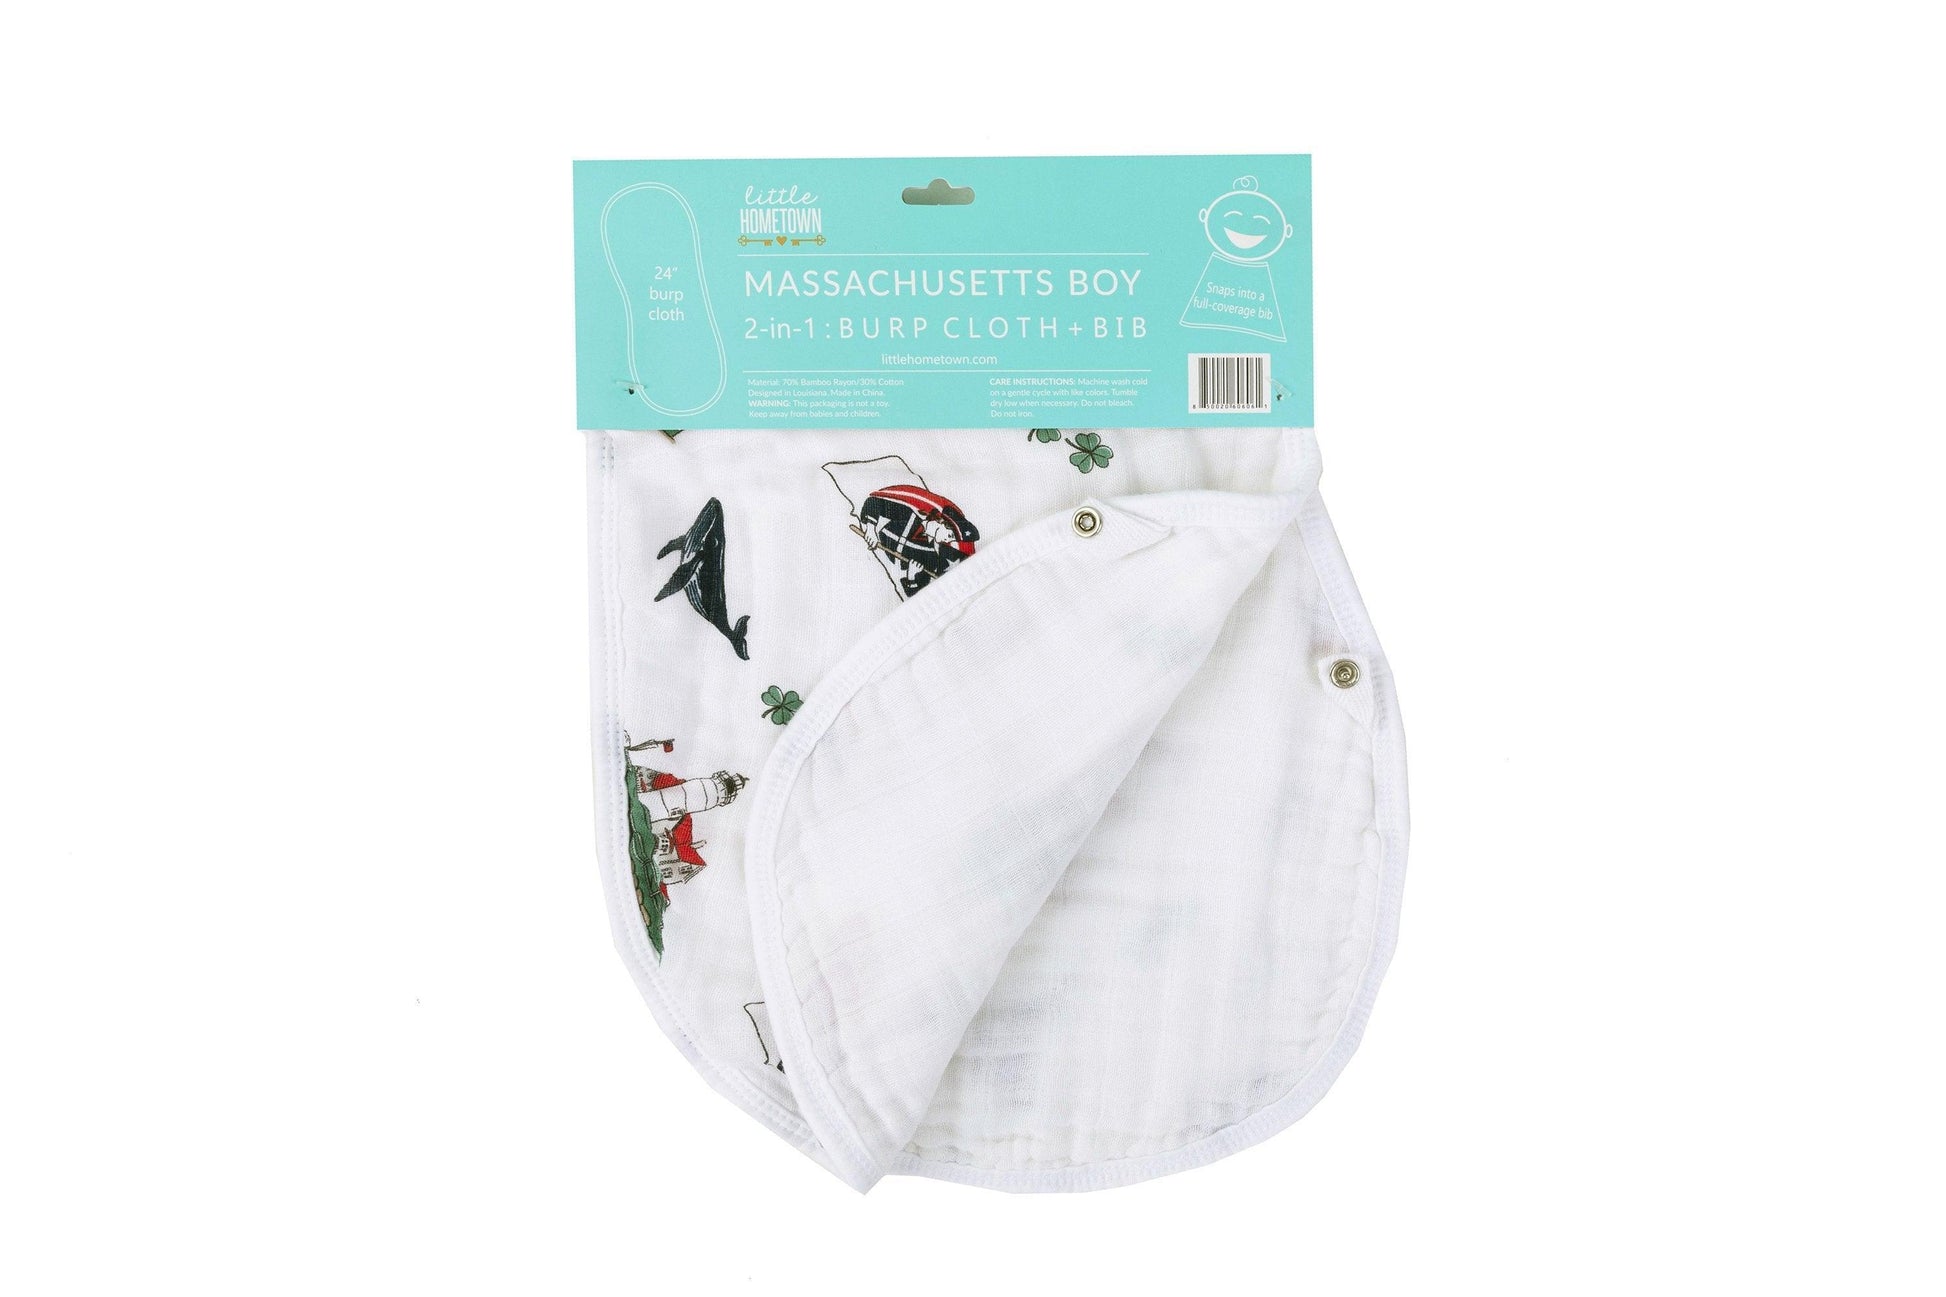 Massachusetts-themed baby bib and burp cloth set featuring state icons and landmarks in soft pastel colors.